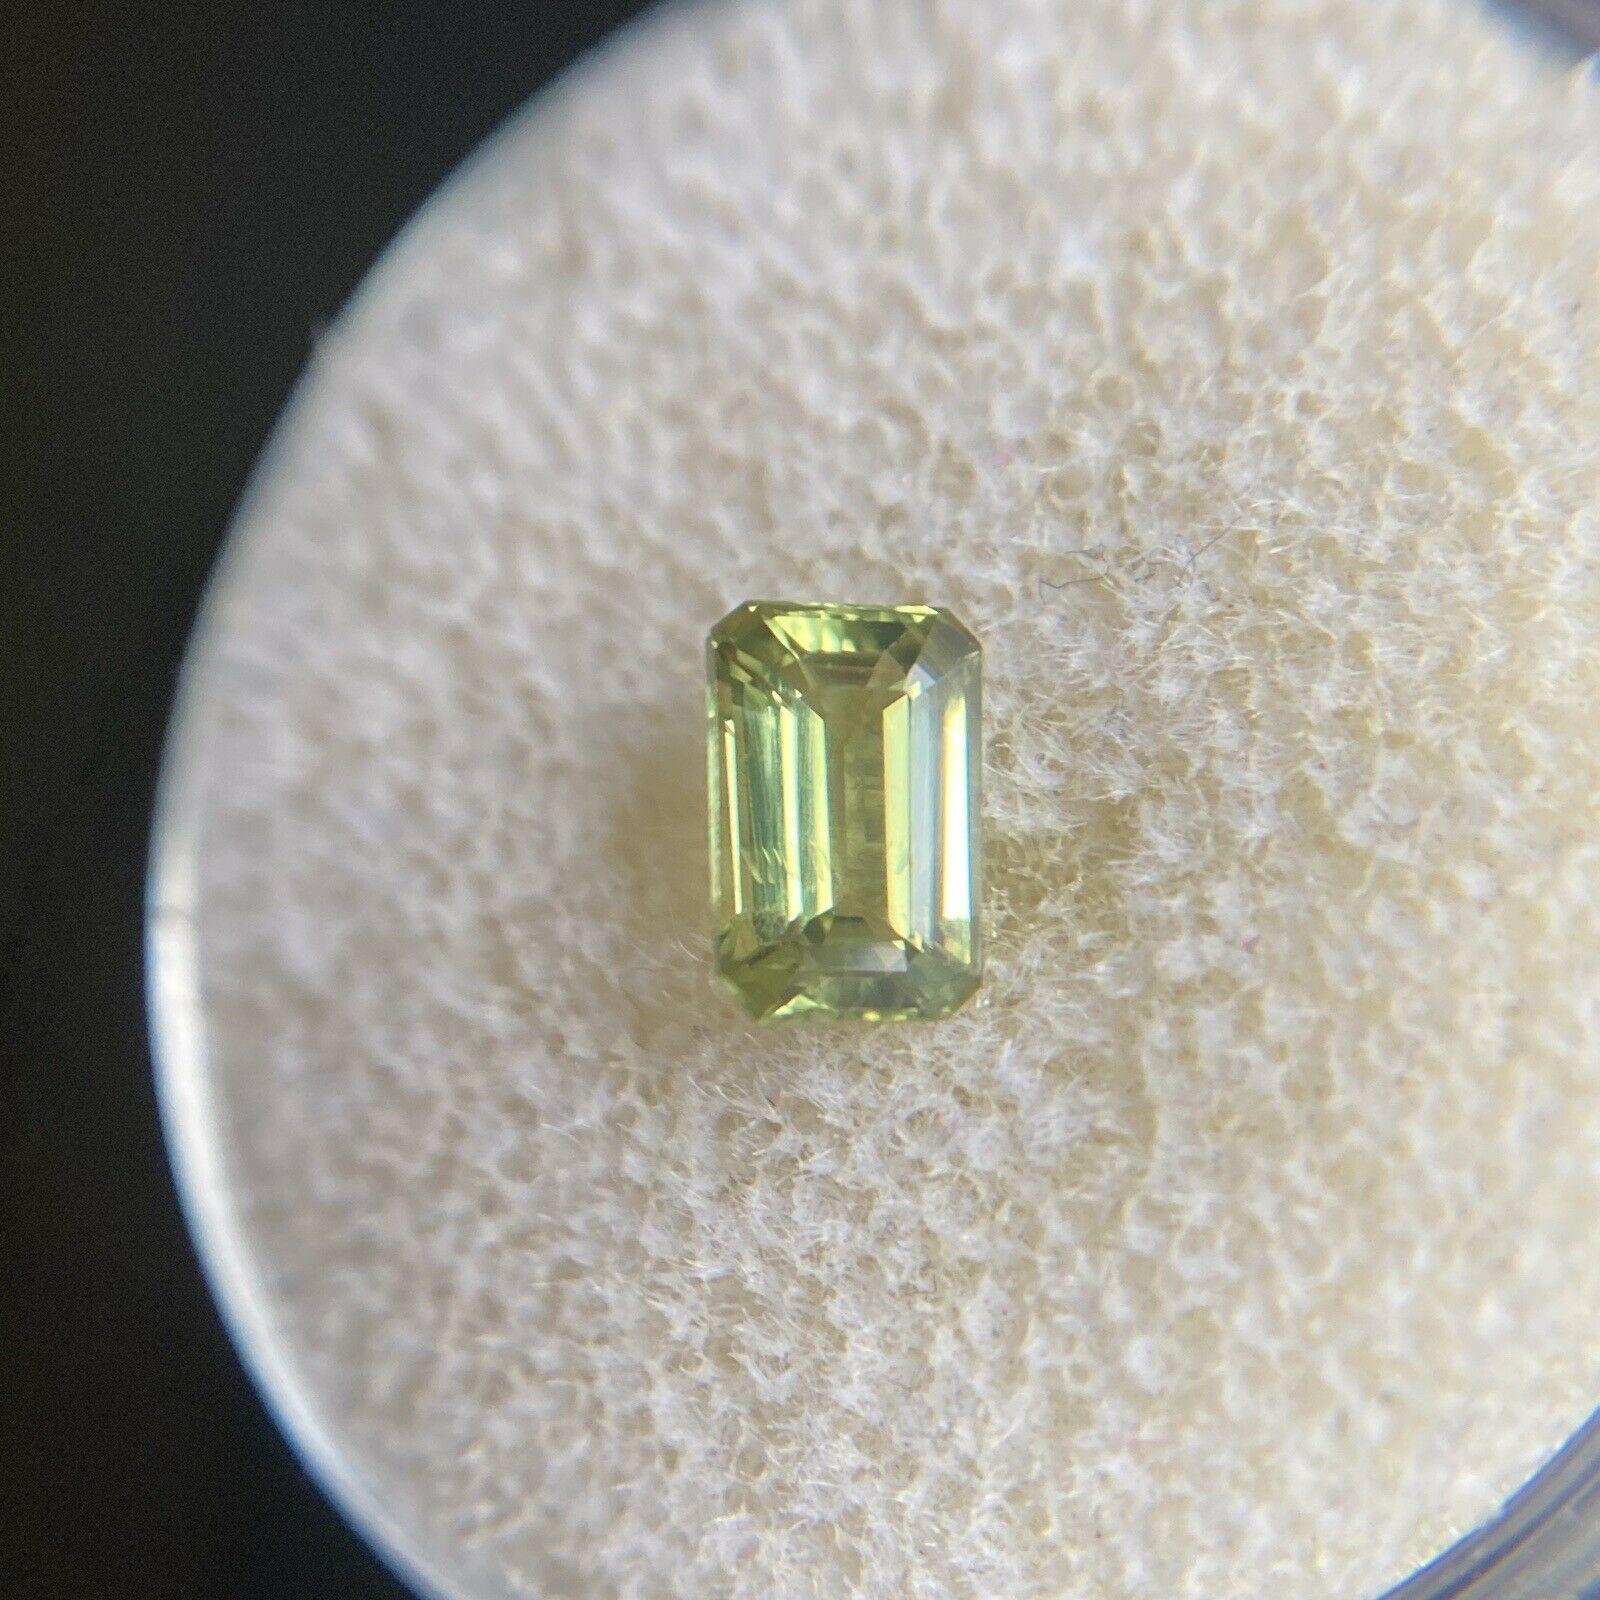 Fine 0.80ct Green Yellow Untreated Australian Sapphire Emerald Cut 6.2 x 4mm Gem

Natural Untreated Australian Green Sapphire Gemstone. 
0.80 Carat with a beautiful yellow green colour and an excellent emerald octagon cut. Also has very good